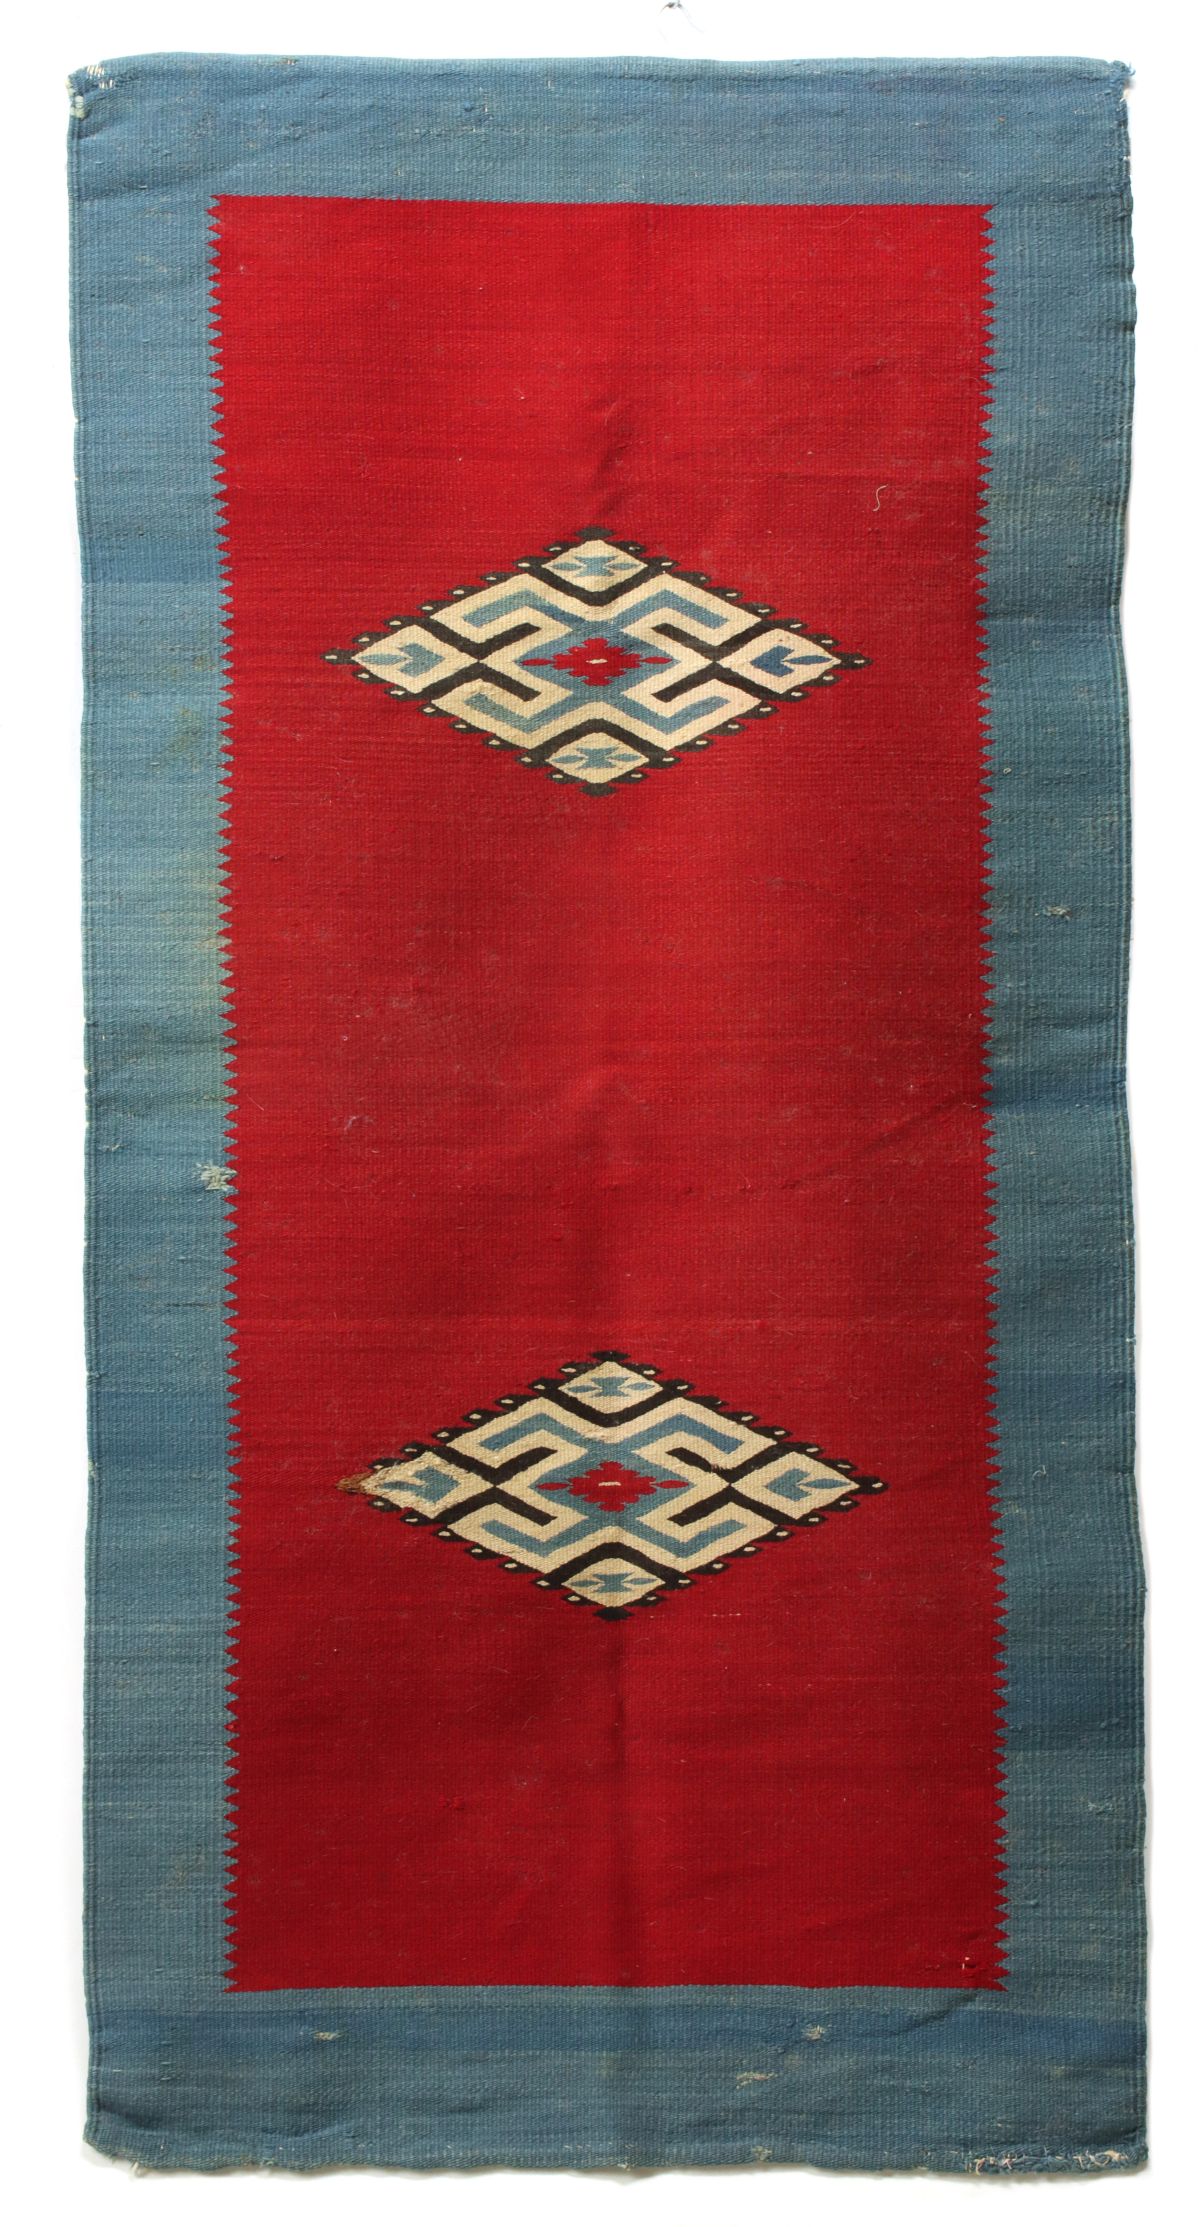 A GOOD EARLY 20TH C. RIO GRANDE OR CHIMAYO WEAVING